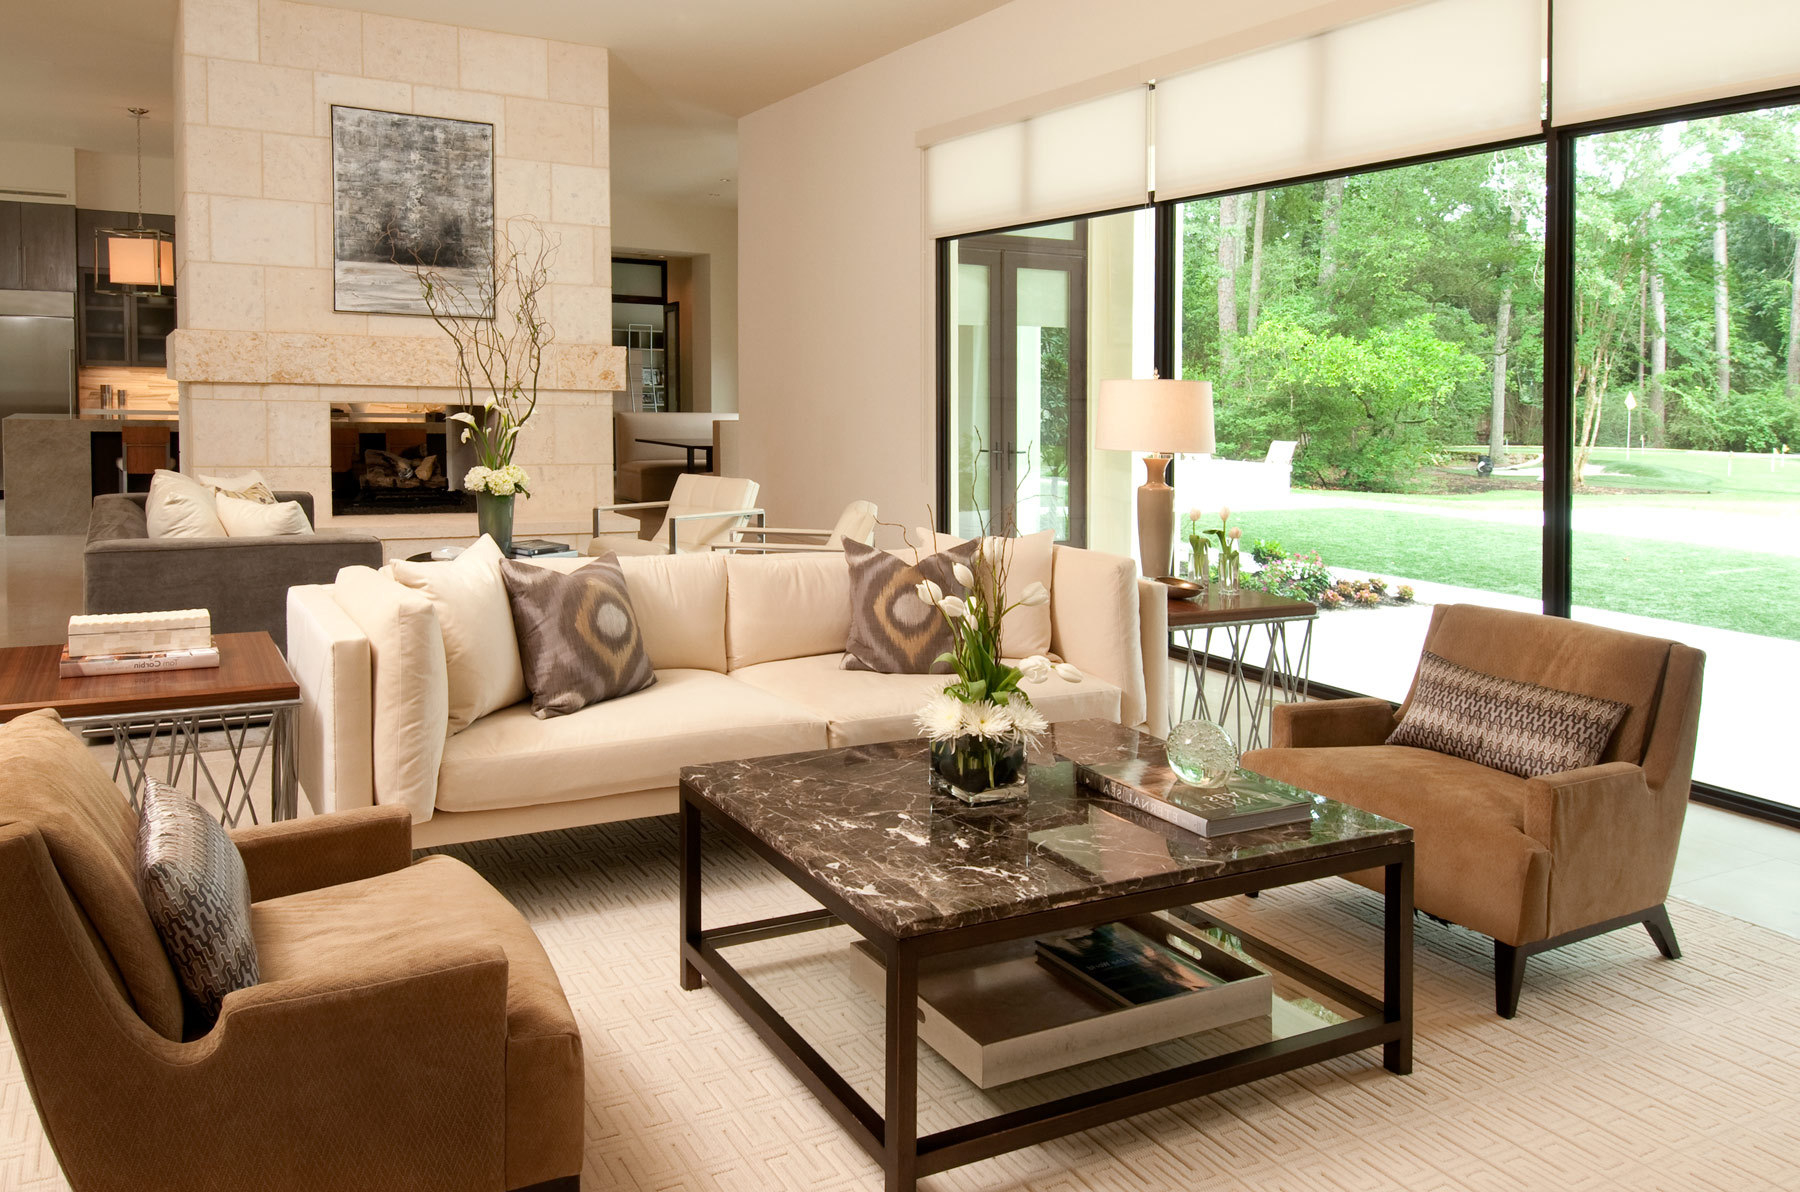 Interior Decorating Ideas: Transform Your Home With Style